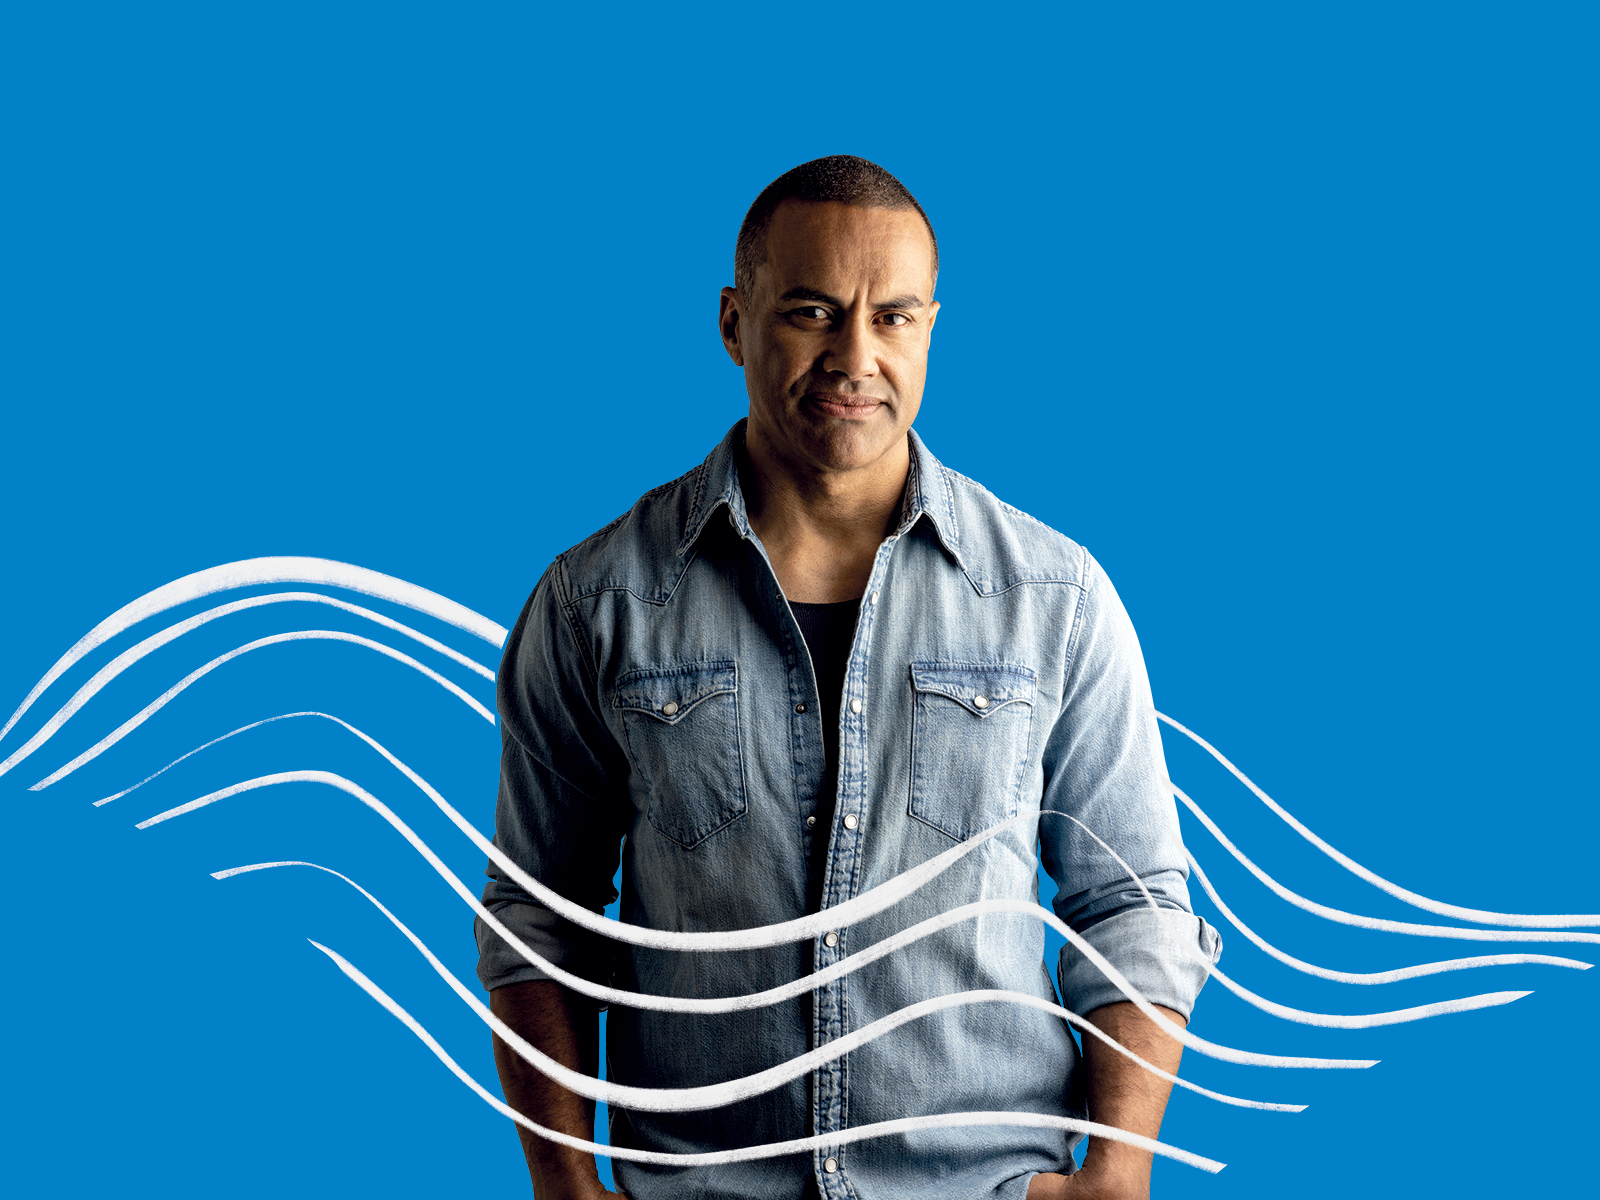 A man in a blue shirt looks to the camera with a stern expression. There are white wavy lines drawn over the image suggesting water or wind. There is a blue background. 